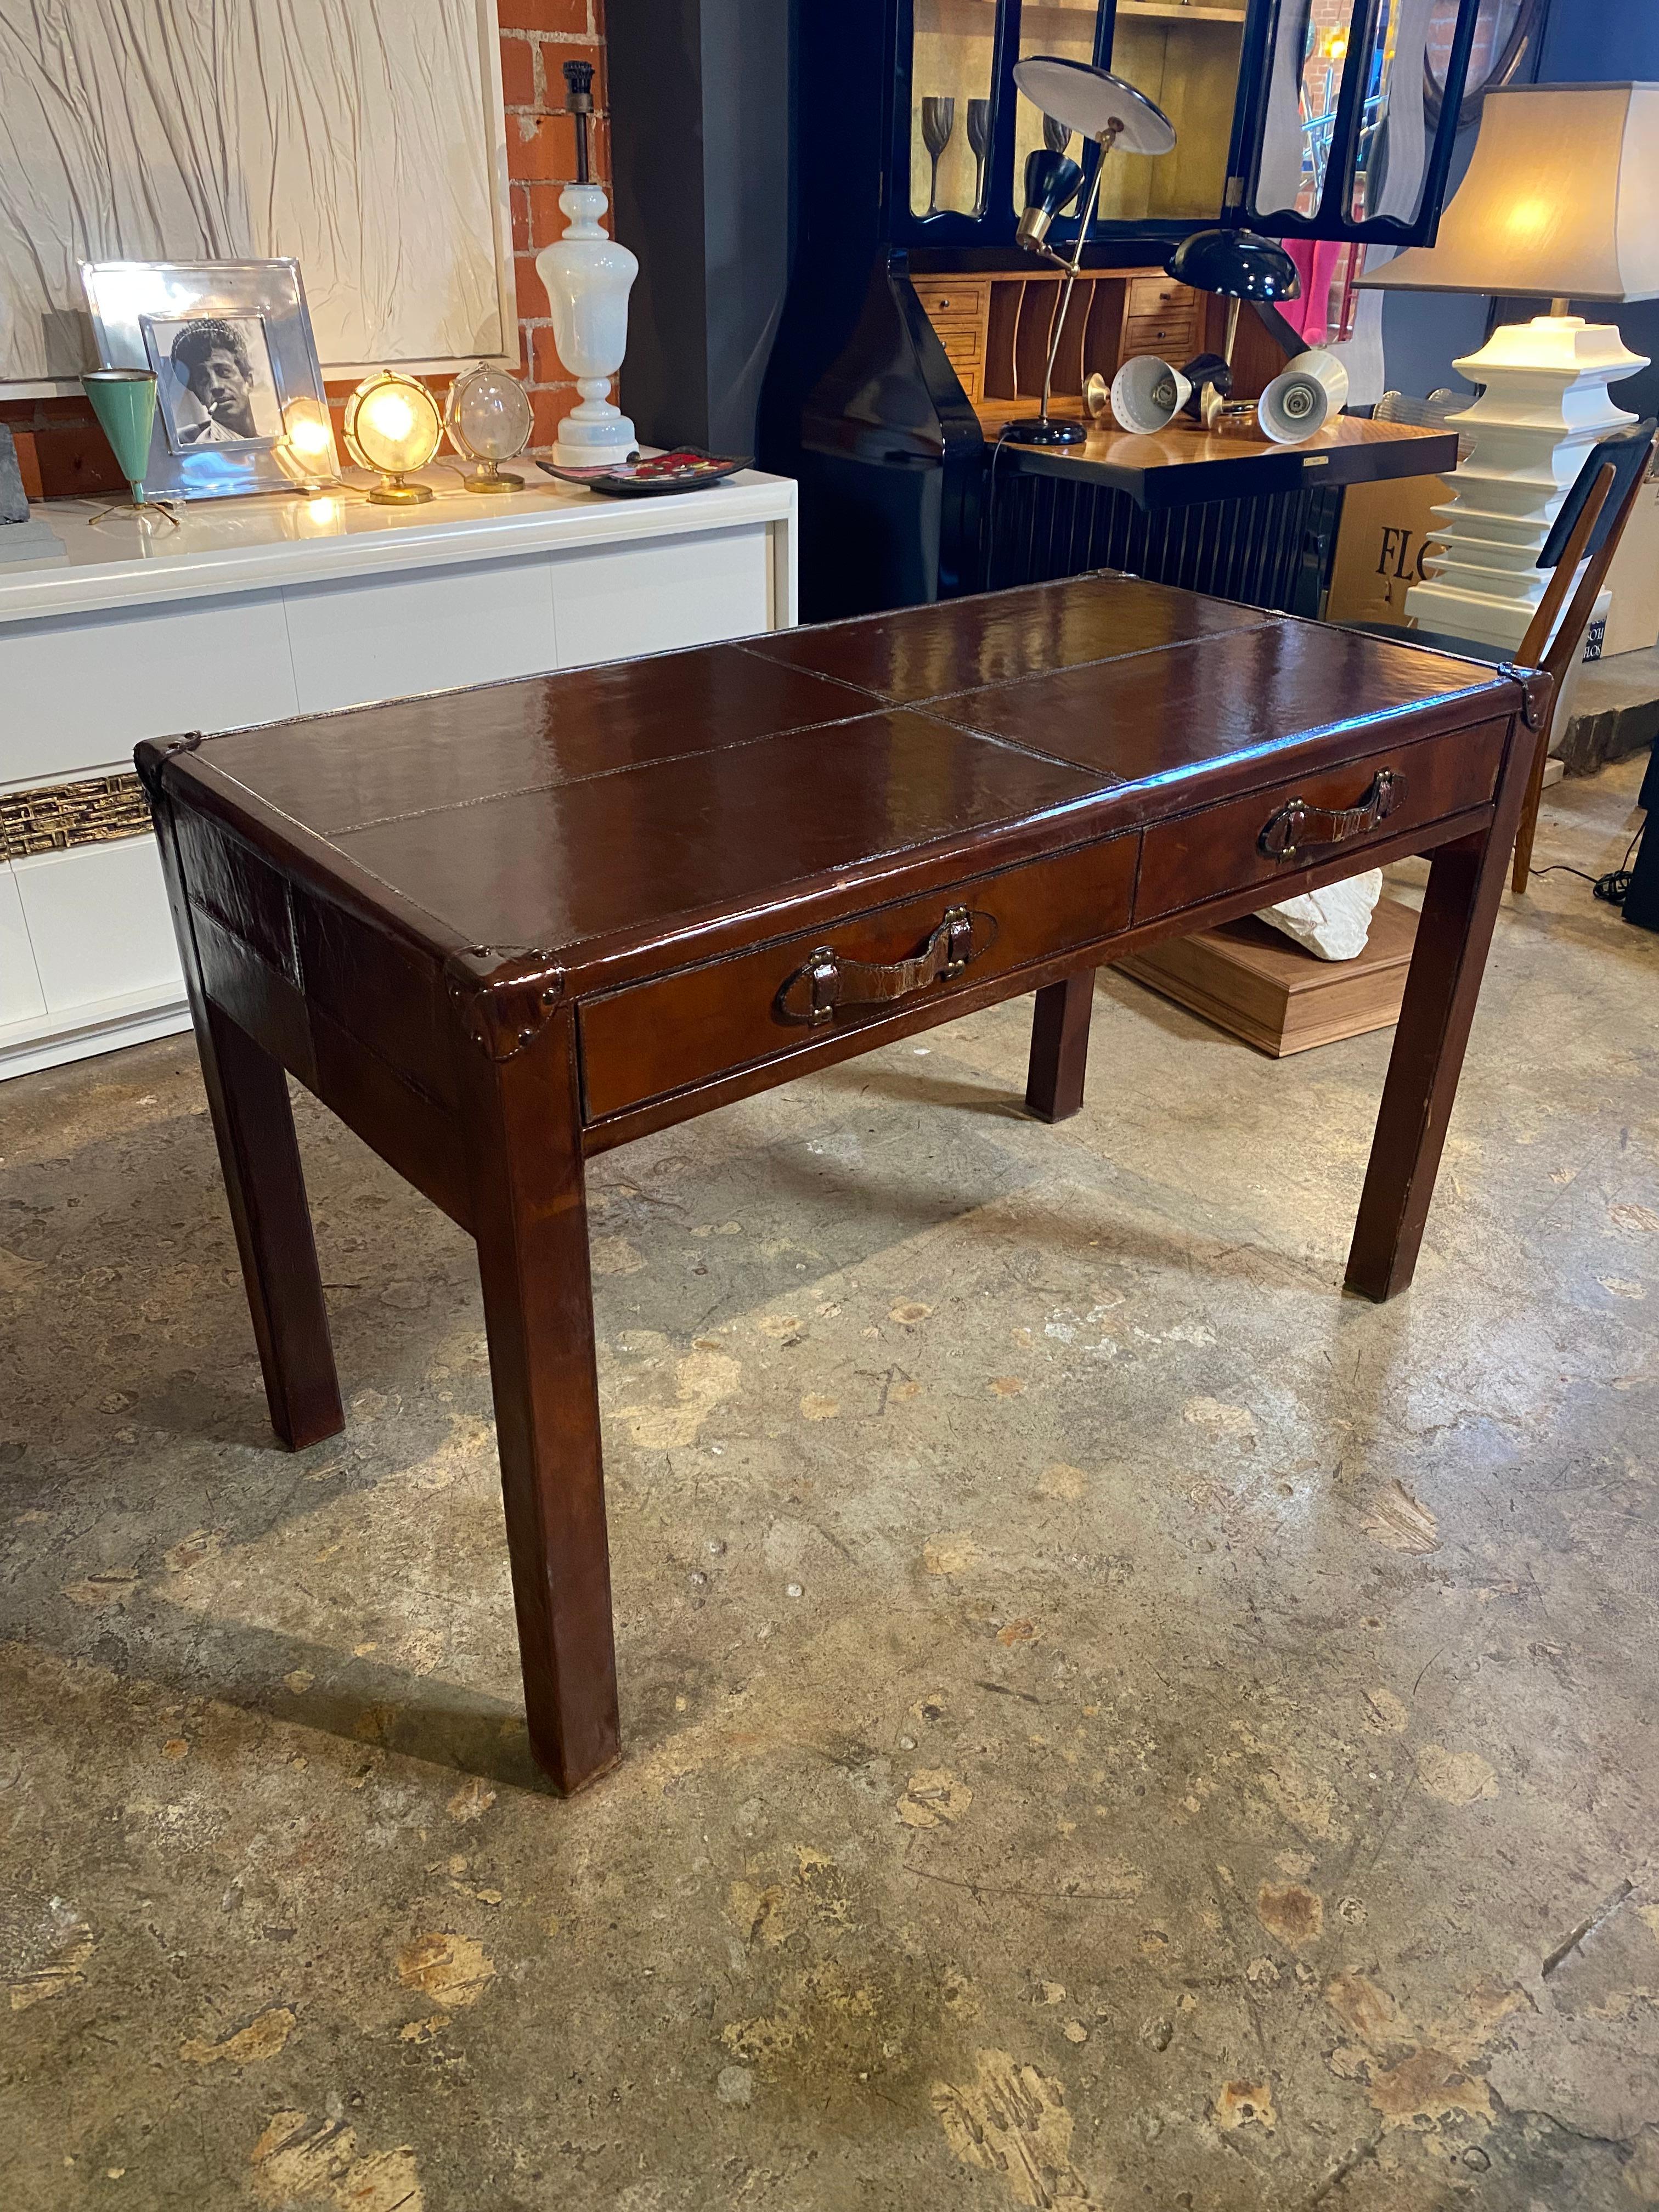 Beautiful Italian Mid century modern leather desk with two drawers. The desk had ben polished in the best possible way to get it back as good as new.• An elegant and simple item that will complete a midcentury study.
